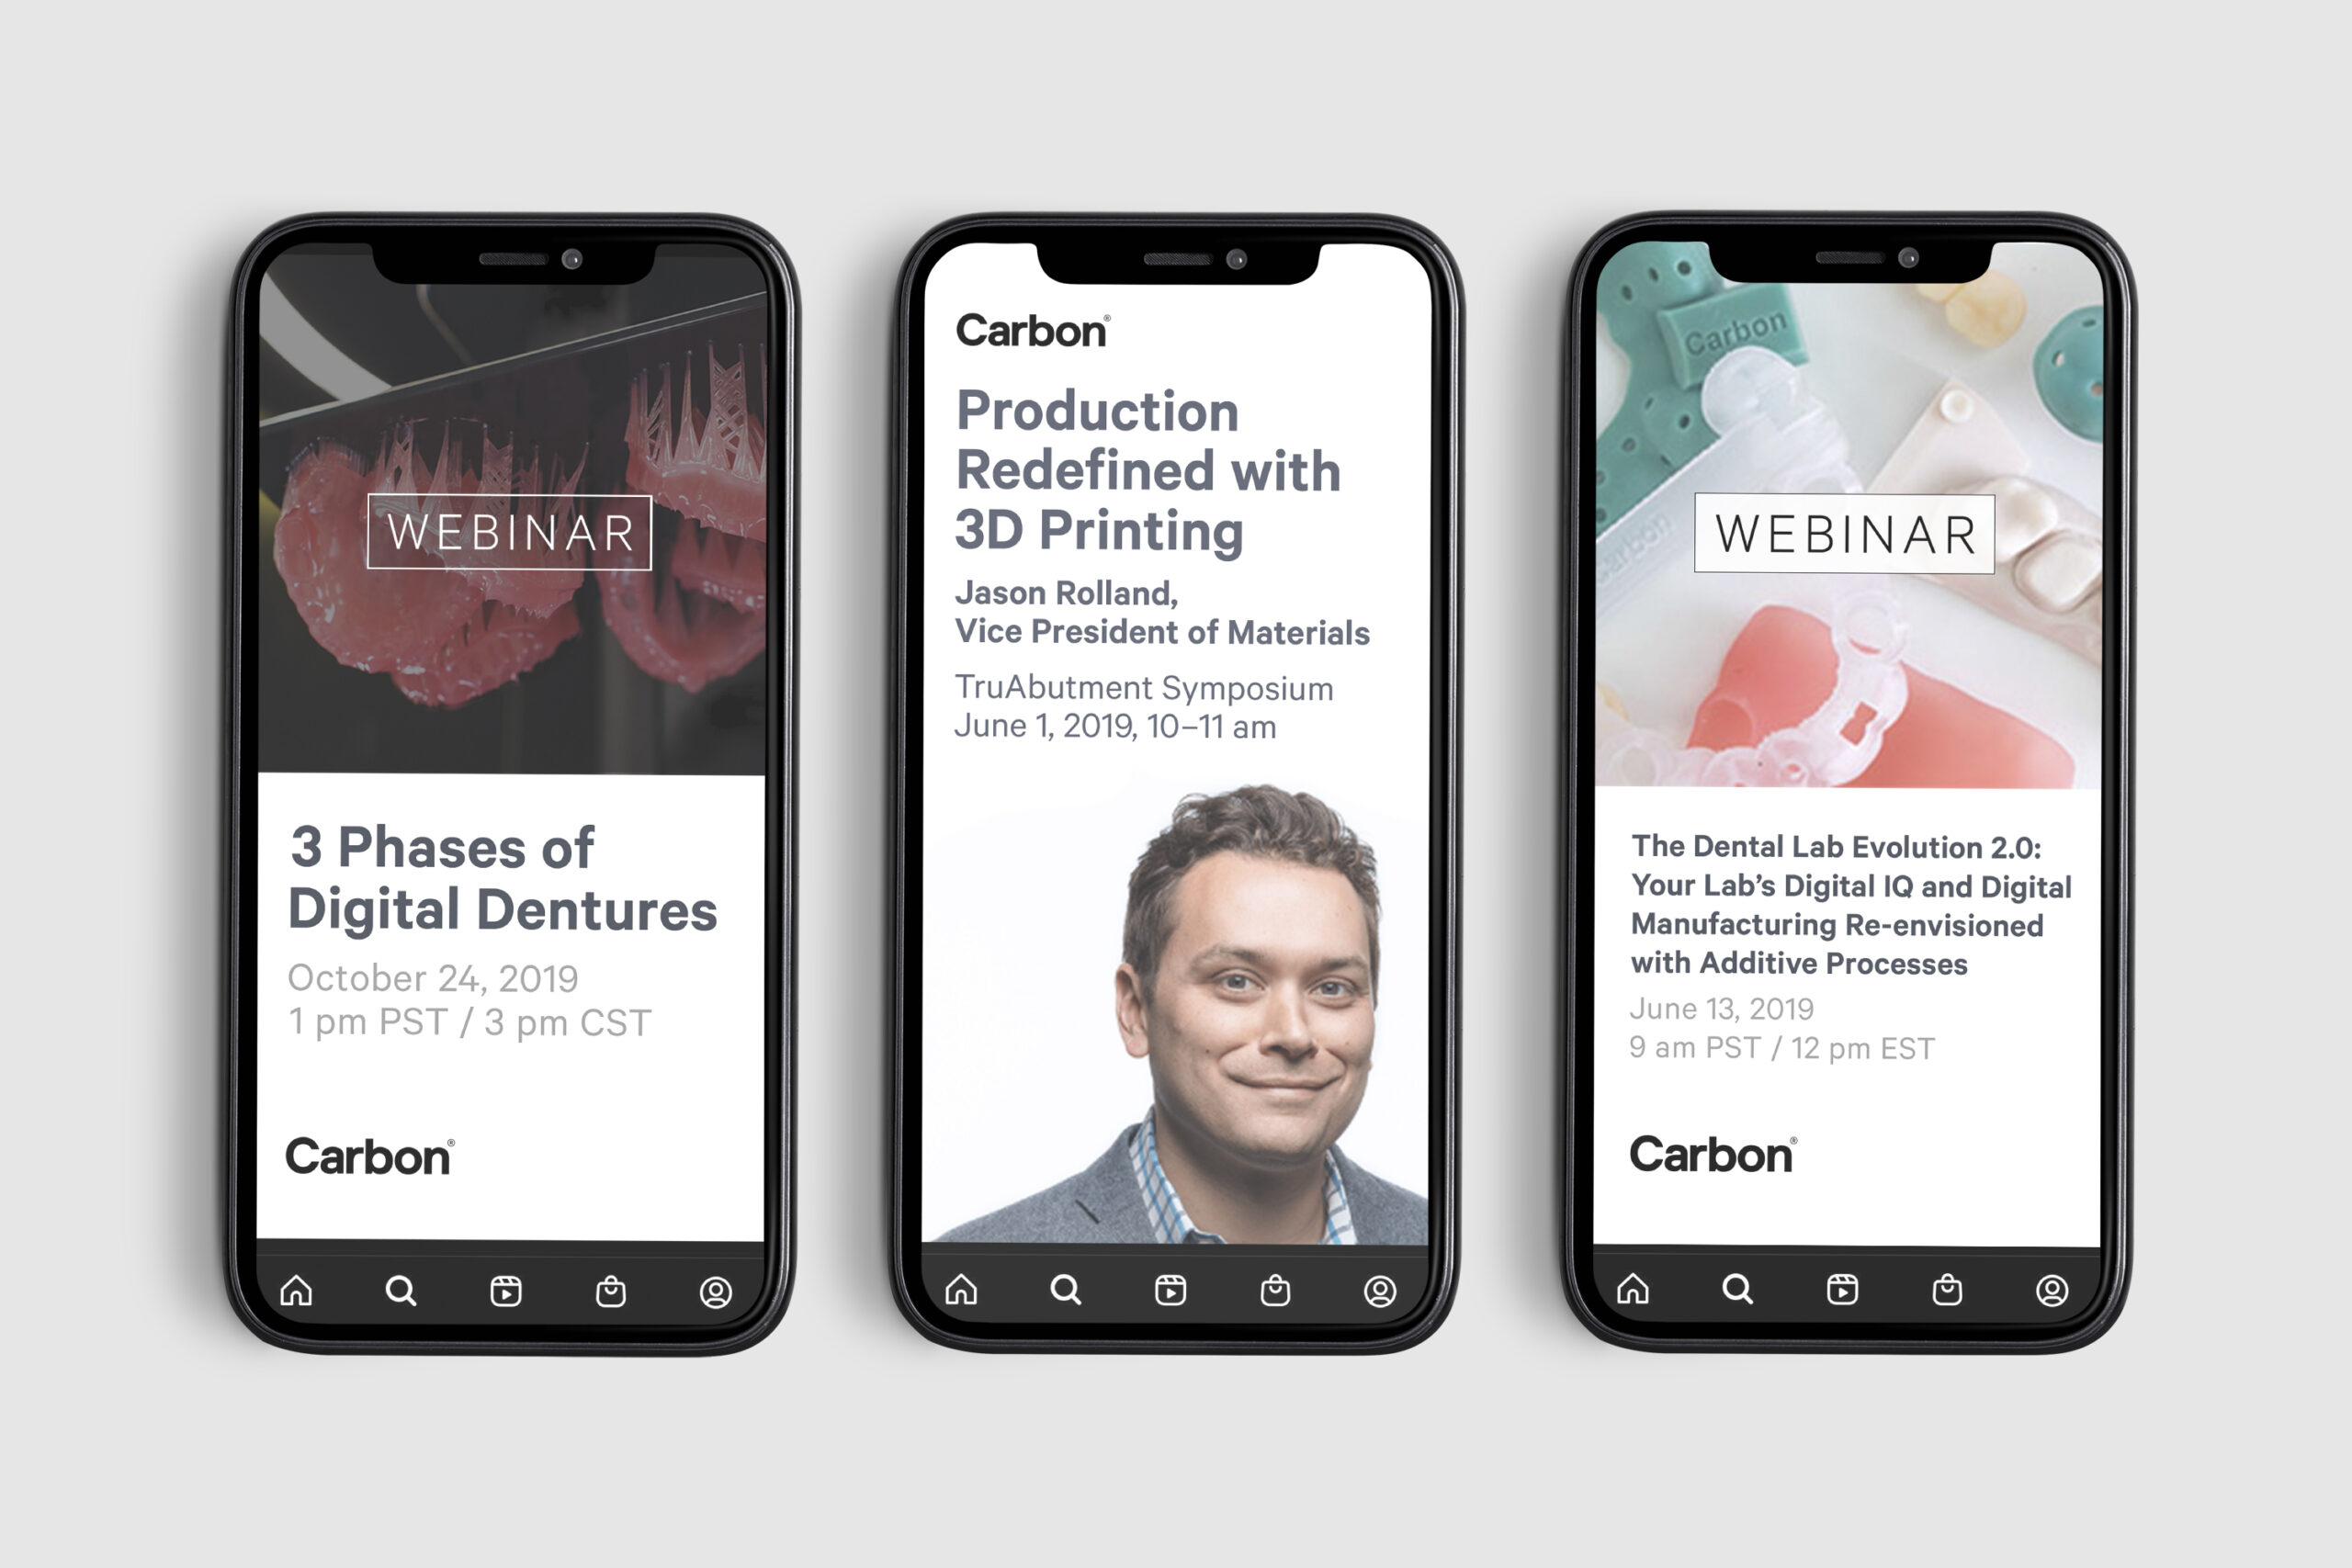 Carbon uses social media to promote webinars, products, partnerships and more. Here are three of many examples we designed.